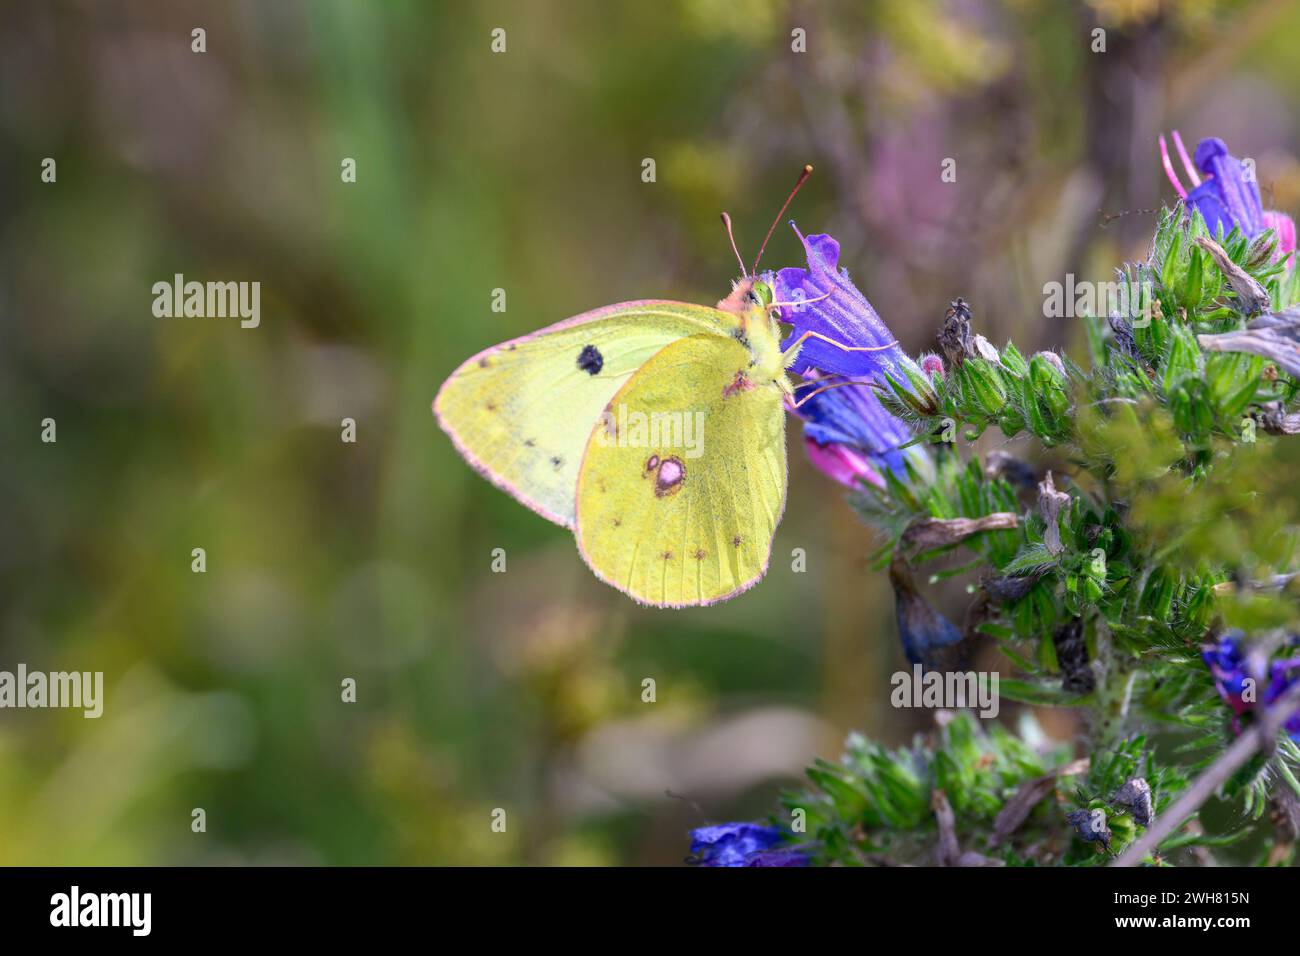 Golden Eight - Colias Hyale Sucks Nectar From A Flower Of The Common Natternkopf - Echium Vulgare Stock Photo